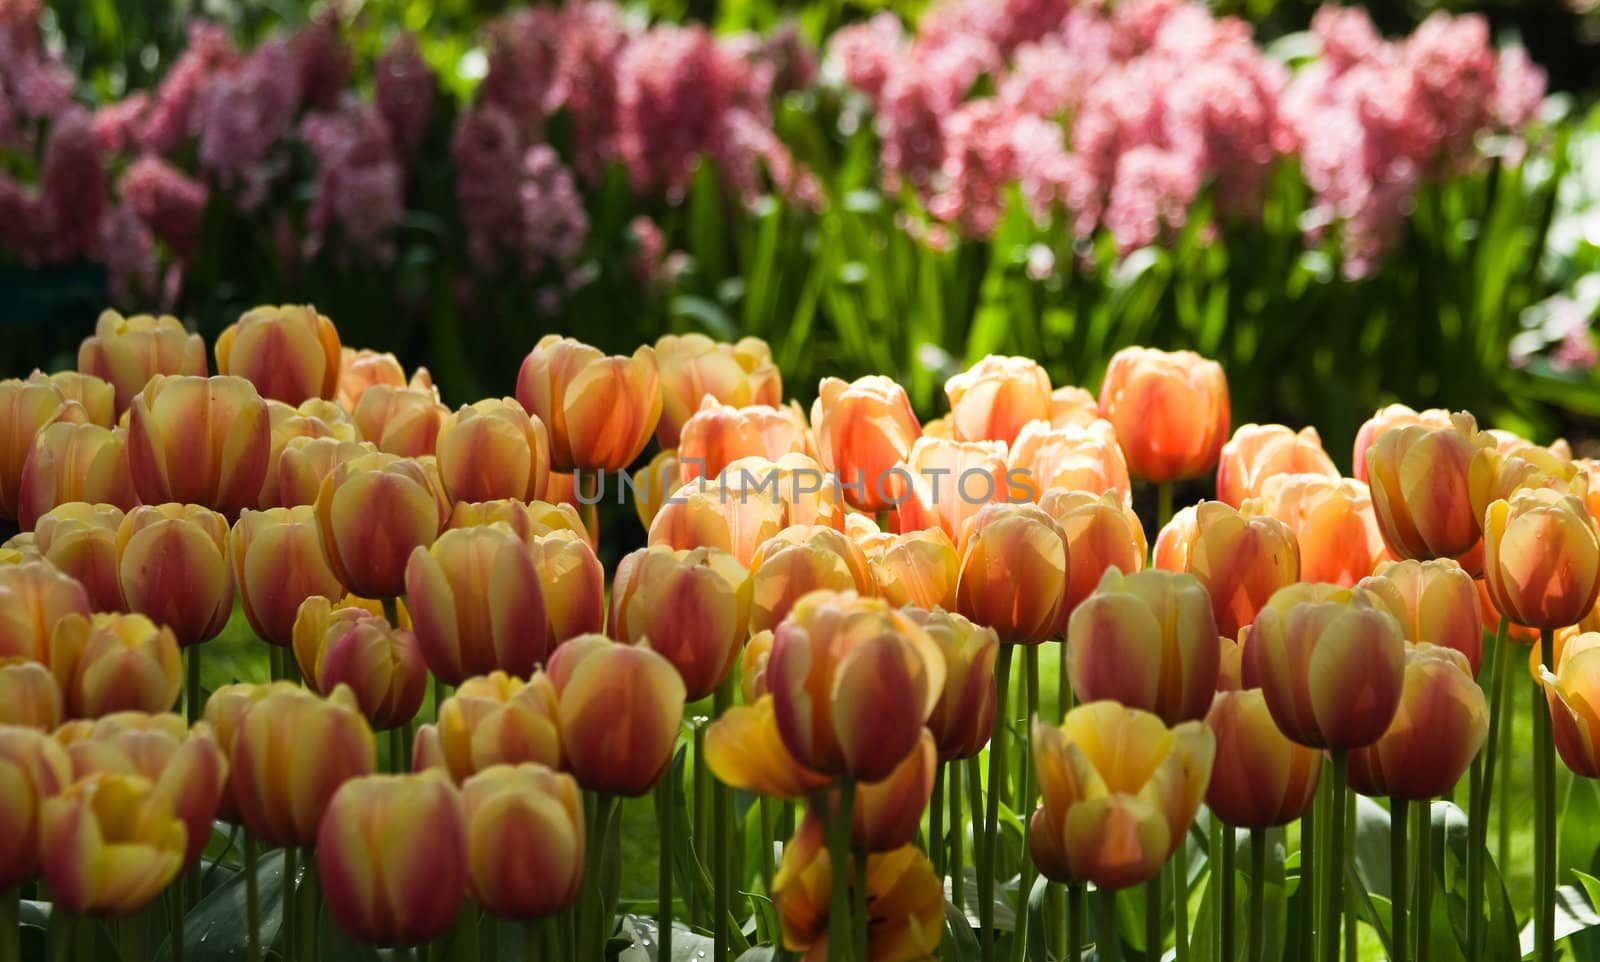 Hyacinth and tulips by Colette